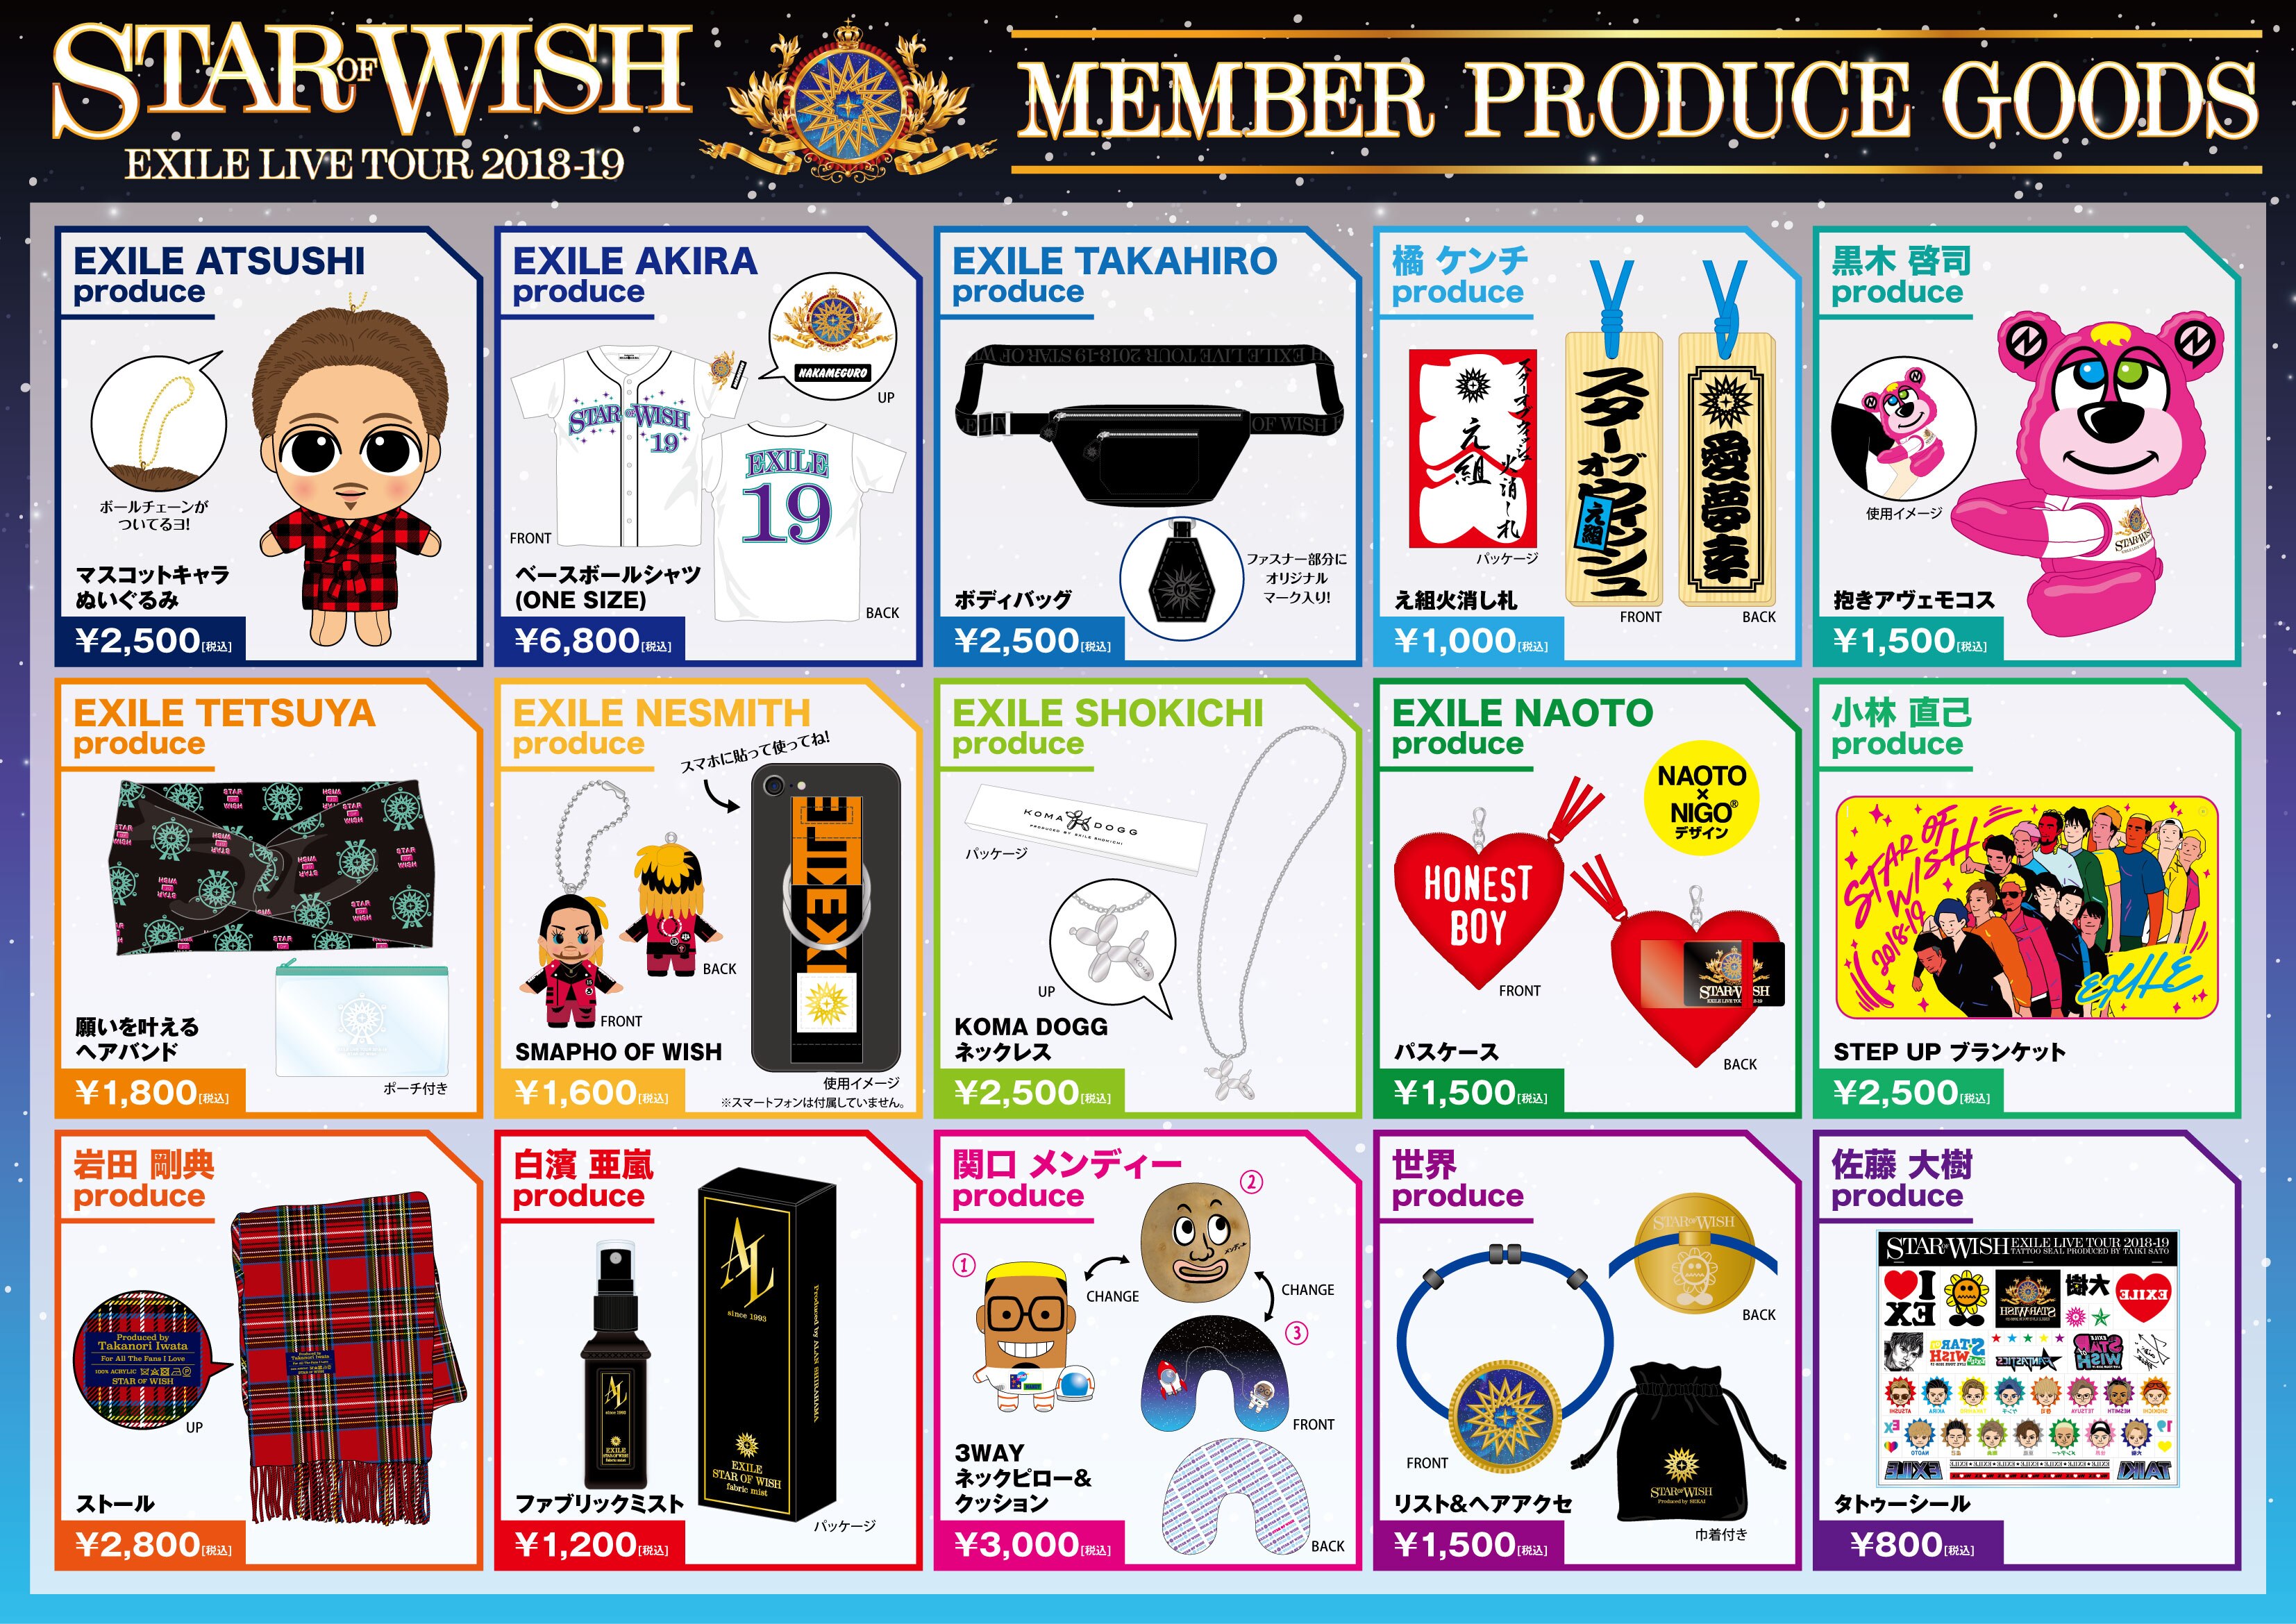 NEWS[EXILE LIVE TOUR 2018-2019 “STAR OF WISH”ツアーグッズ解禁!!]| EXILE